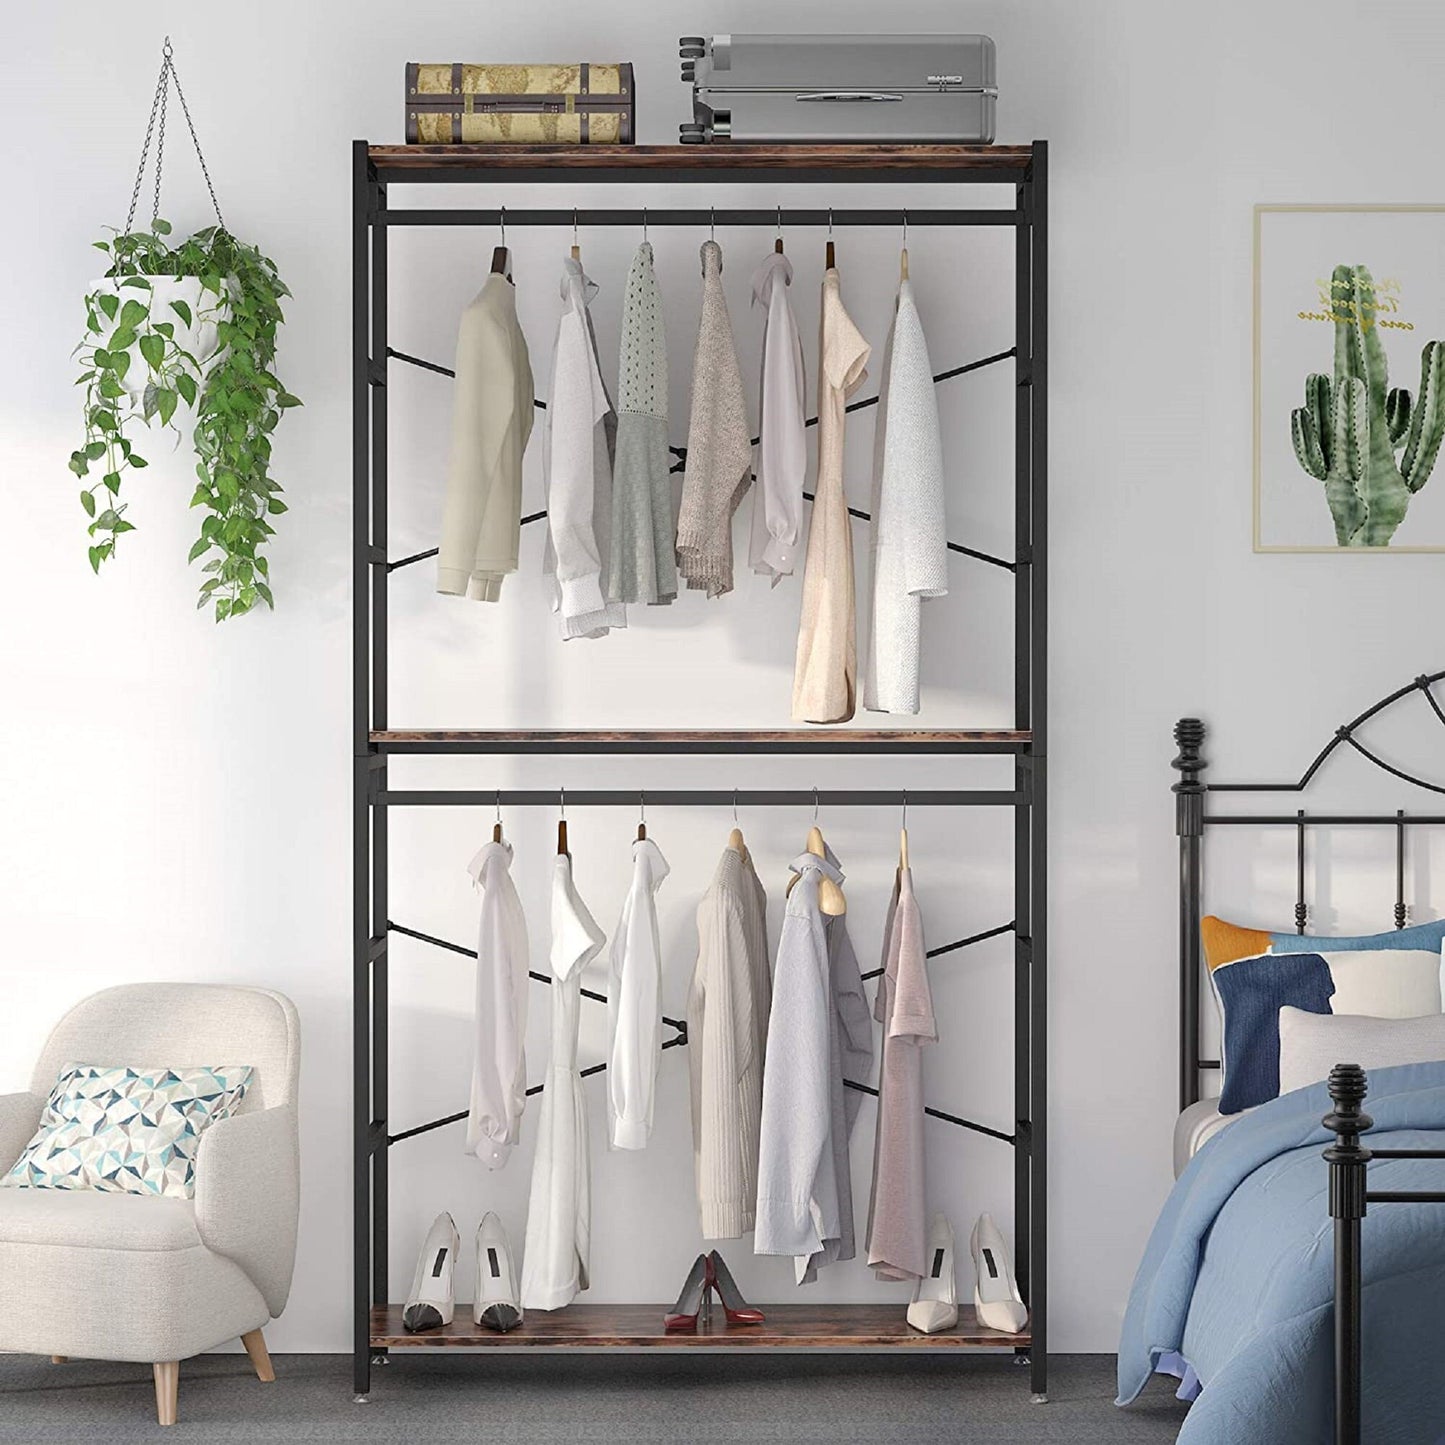 Free-standing Closet Organizer with 3 Storage Shelves and 2 Hanging Rod